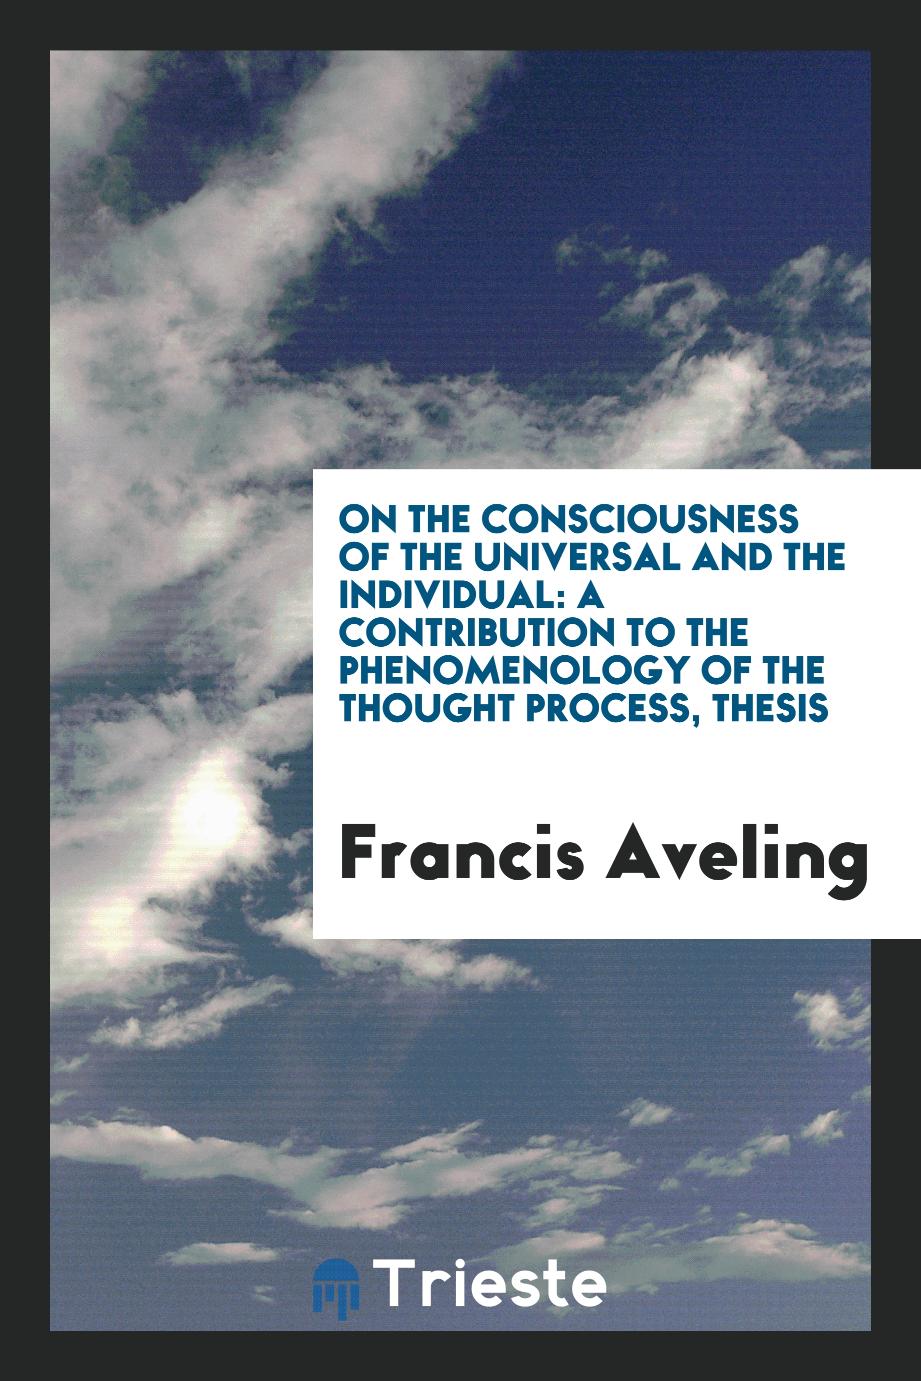 On the Consciousness of the Universal and the Individual: A Contribution to the Phenomenology of the Thought Process, Thesis